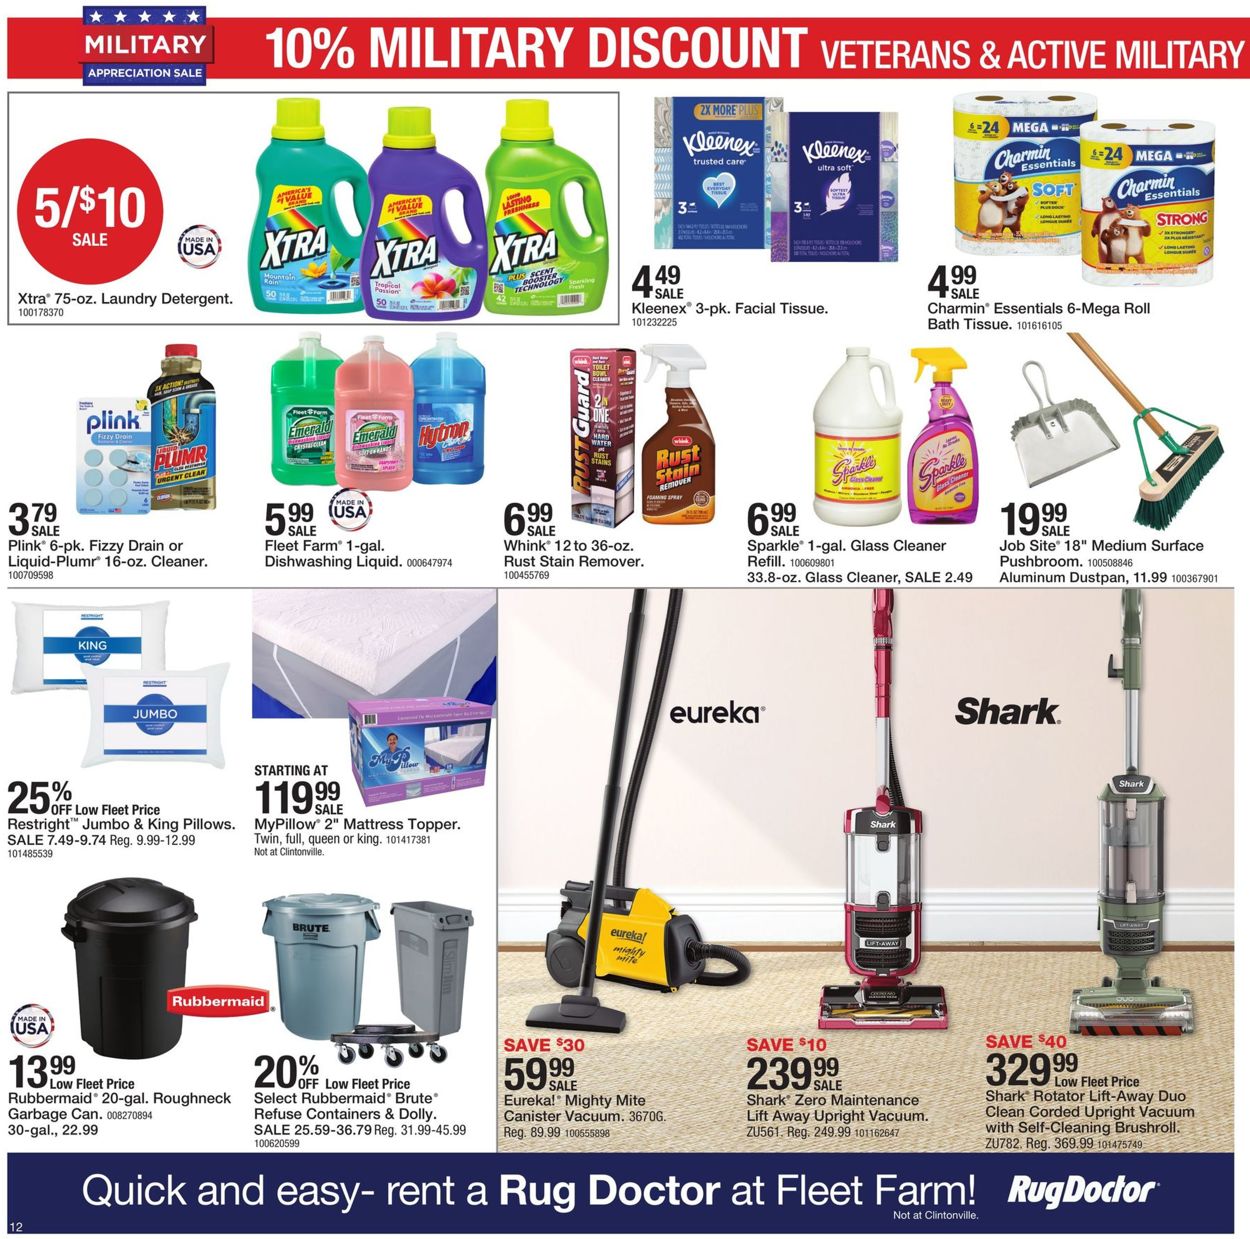 Mills Fleet Farm Current weekly ad 06/18 - 06/26/2021 [12] - frequent ...